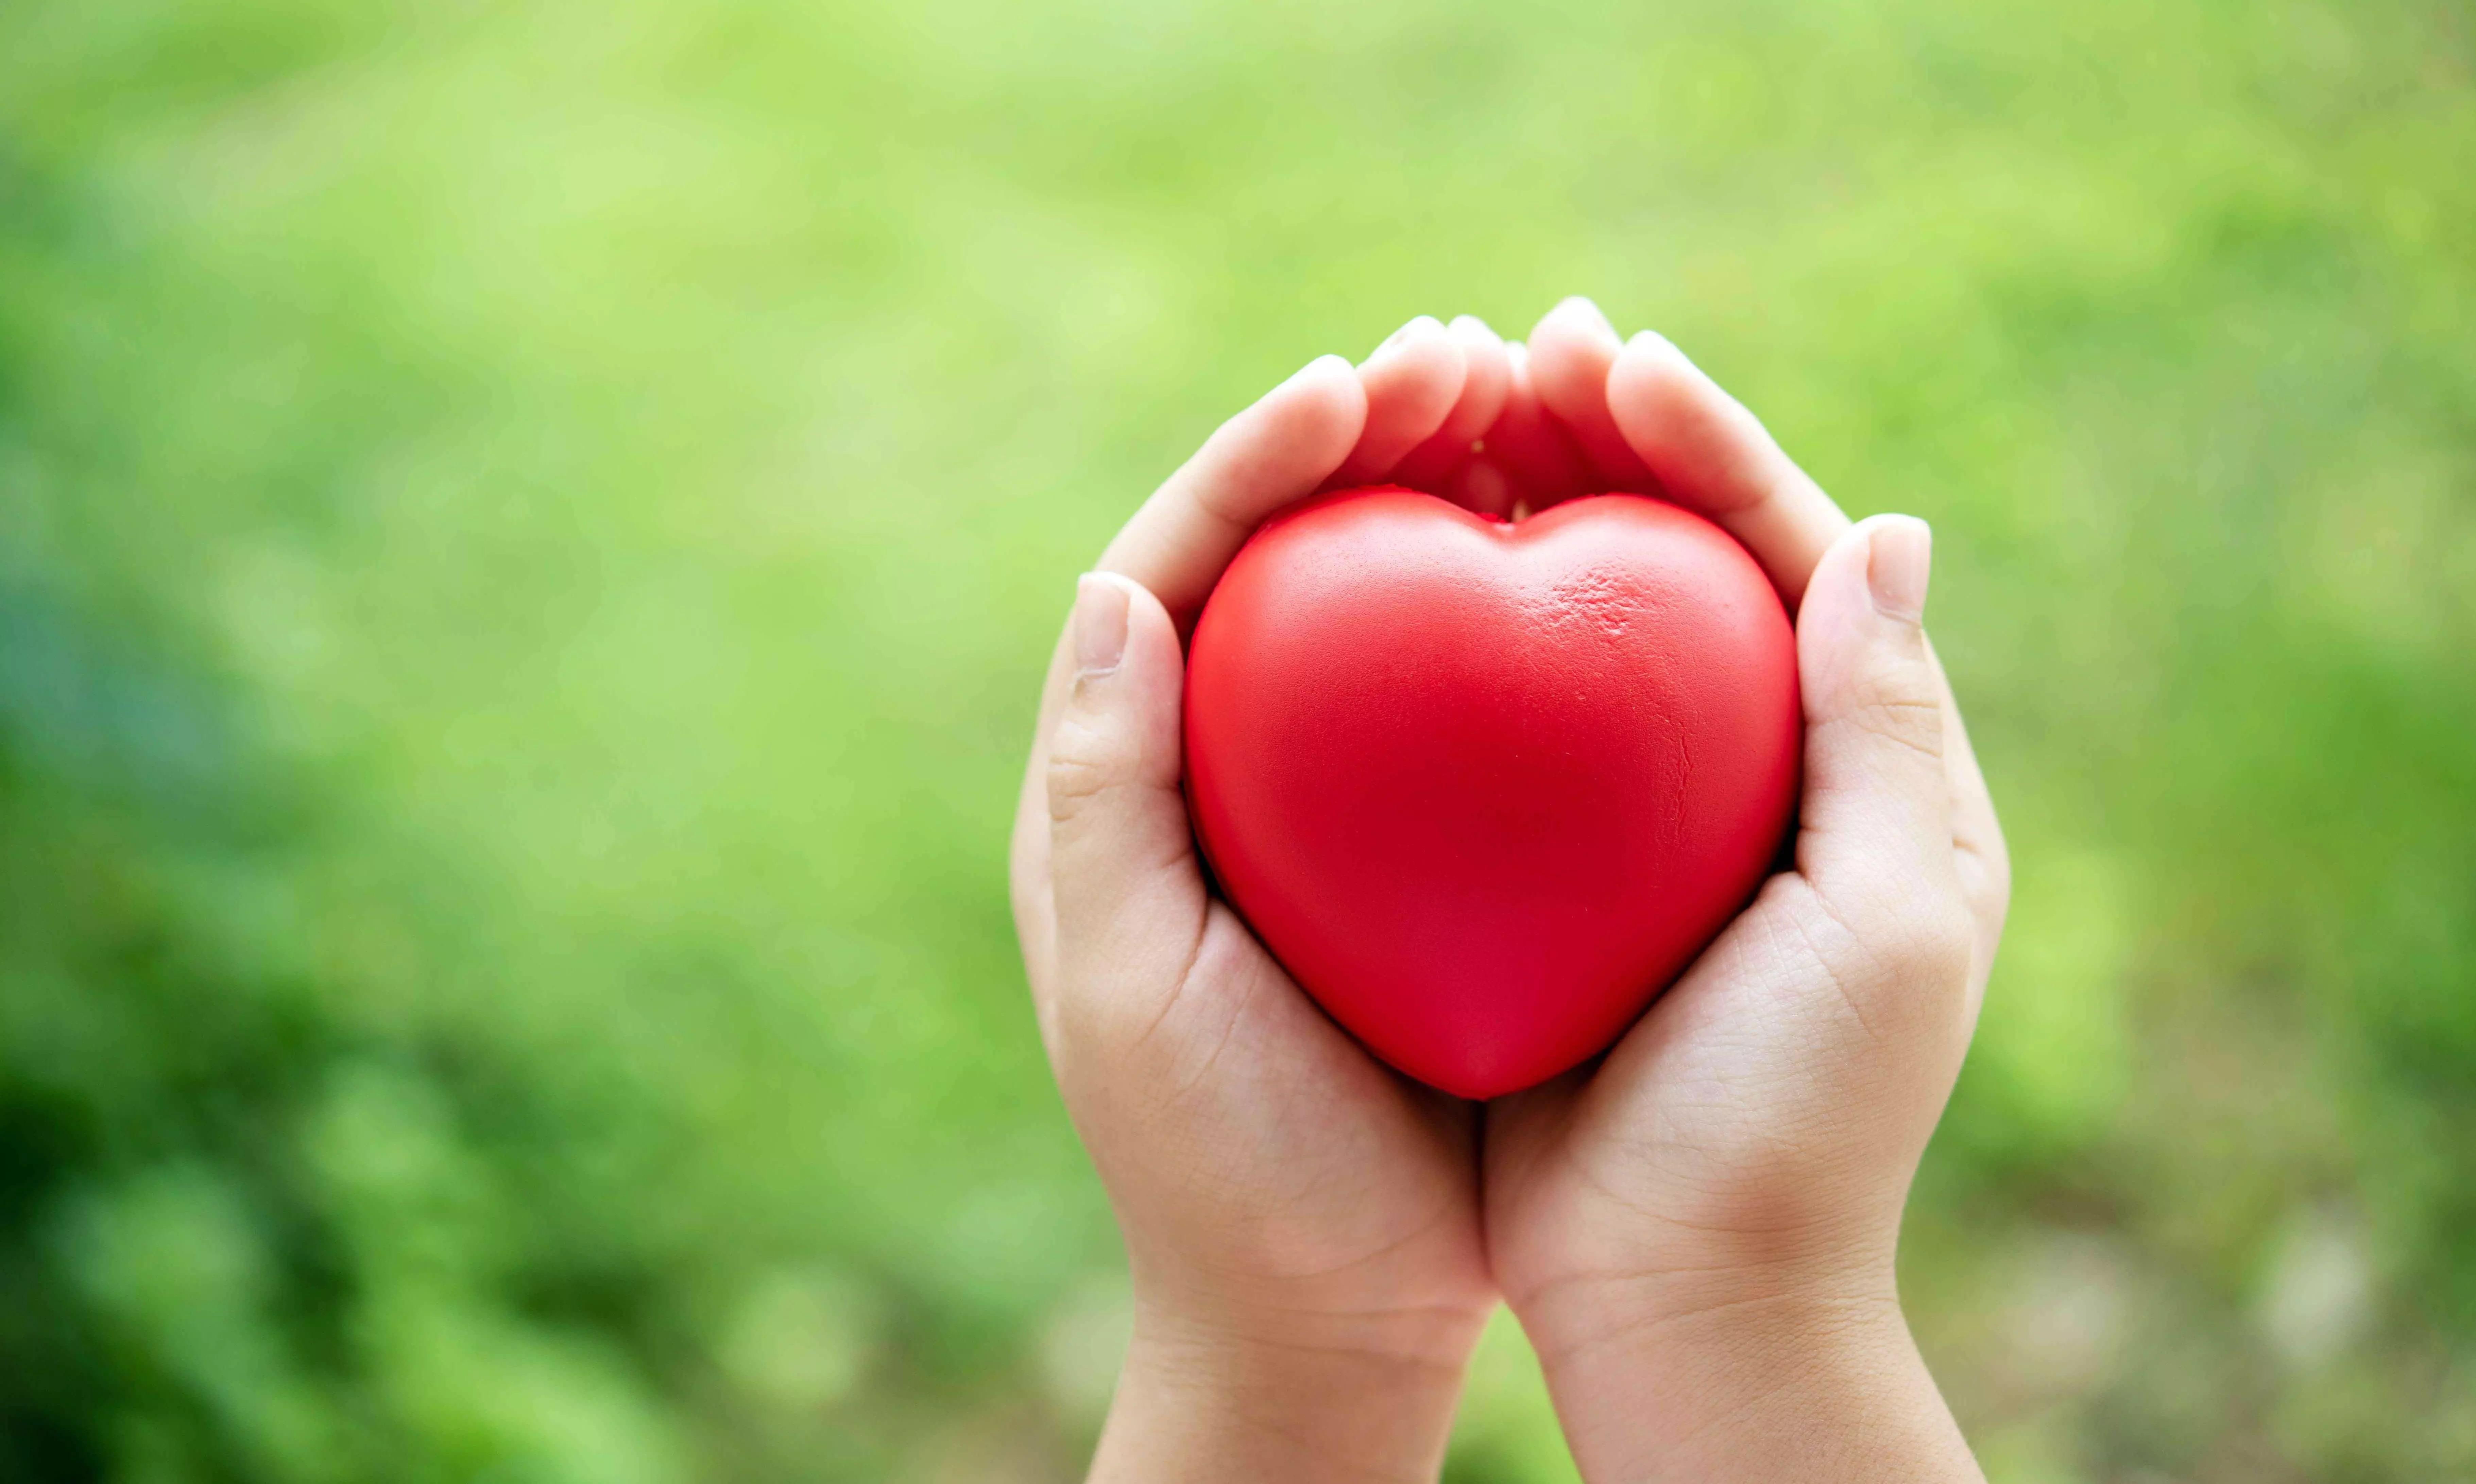 Keeping your heart healthy